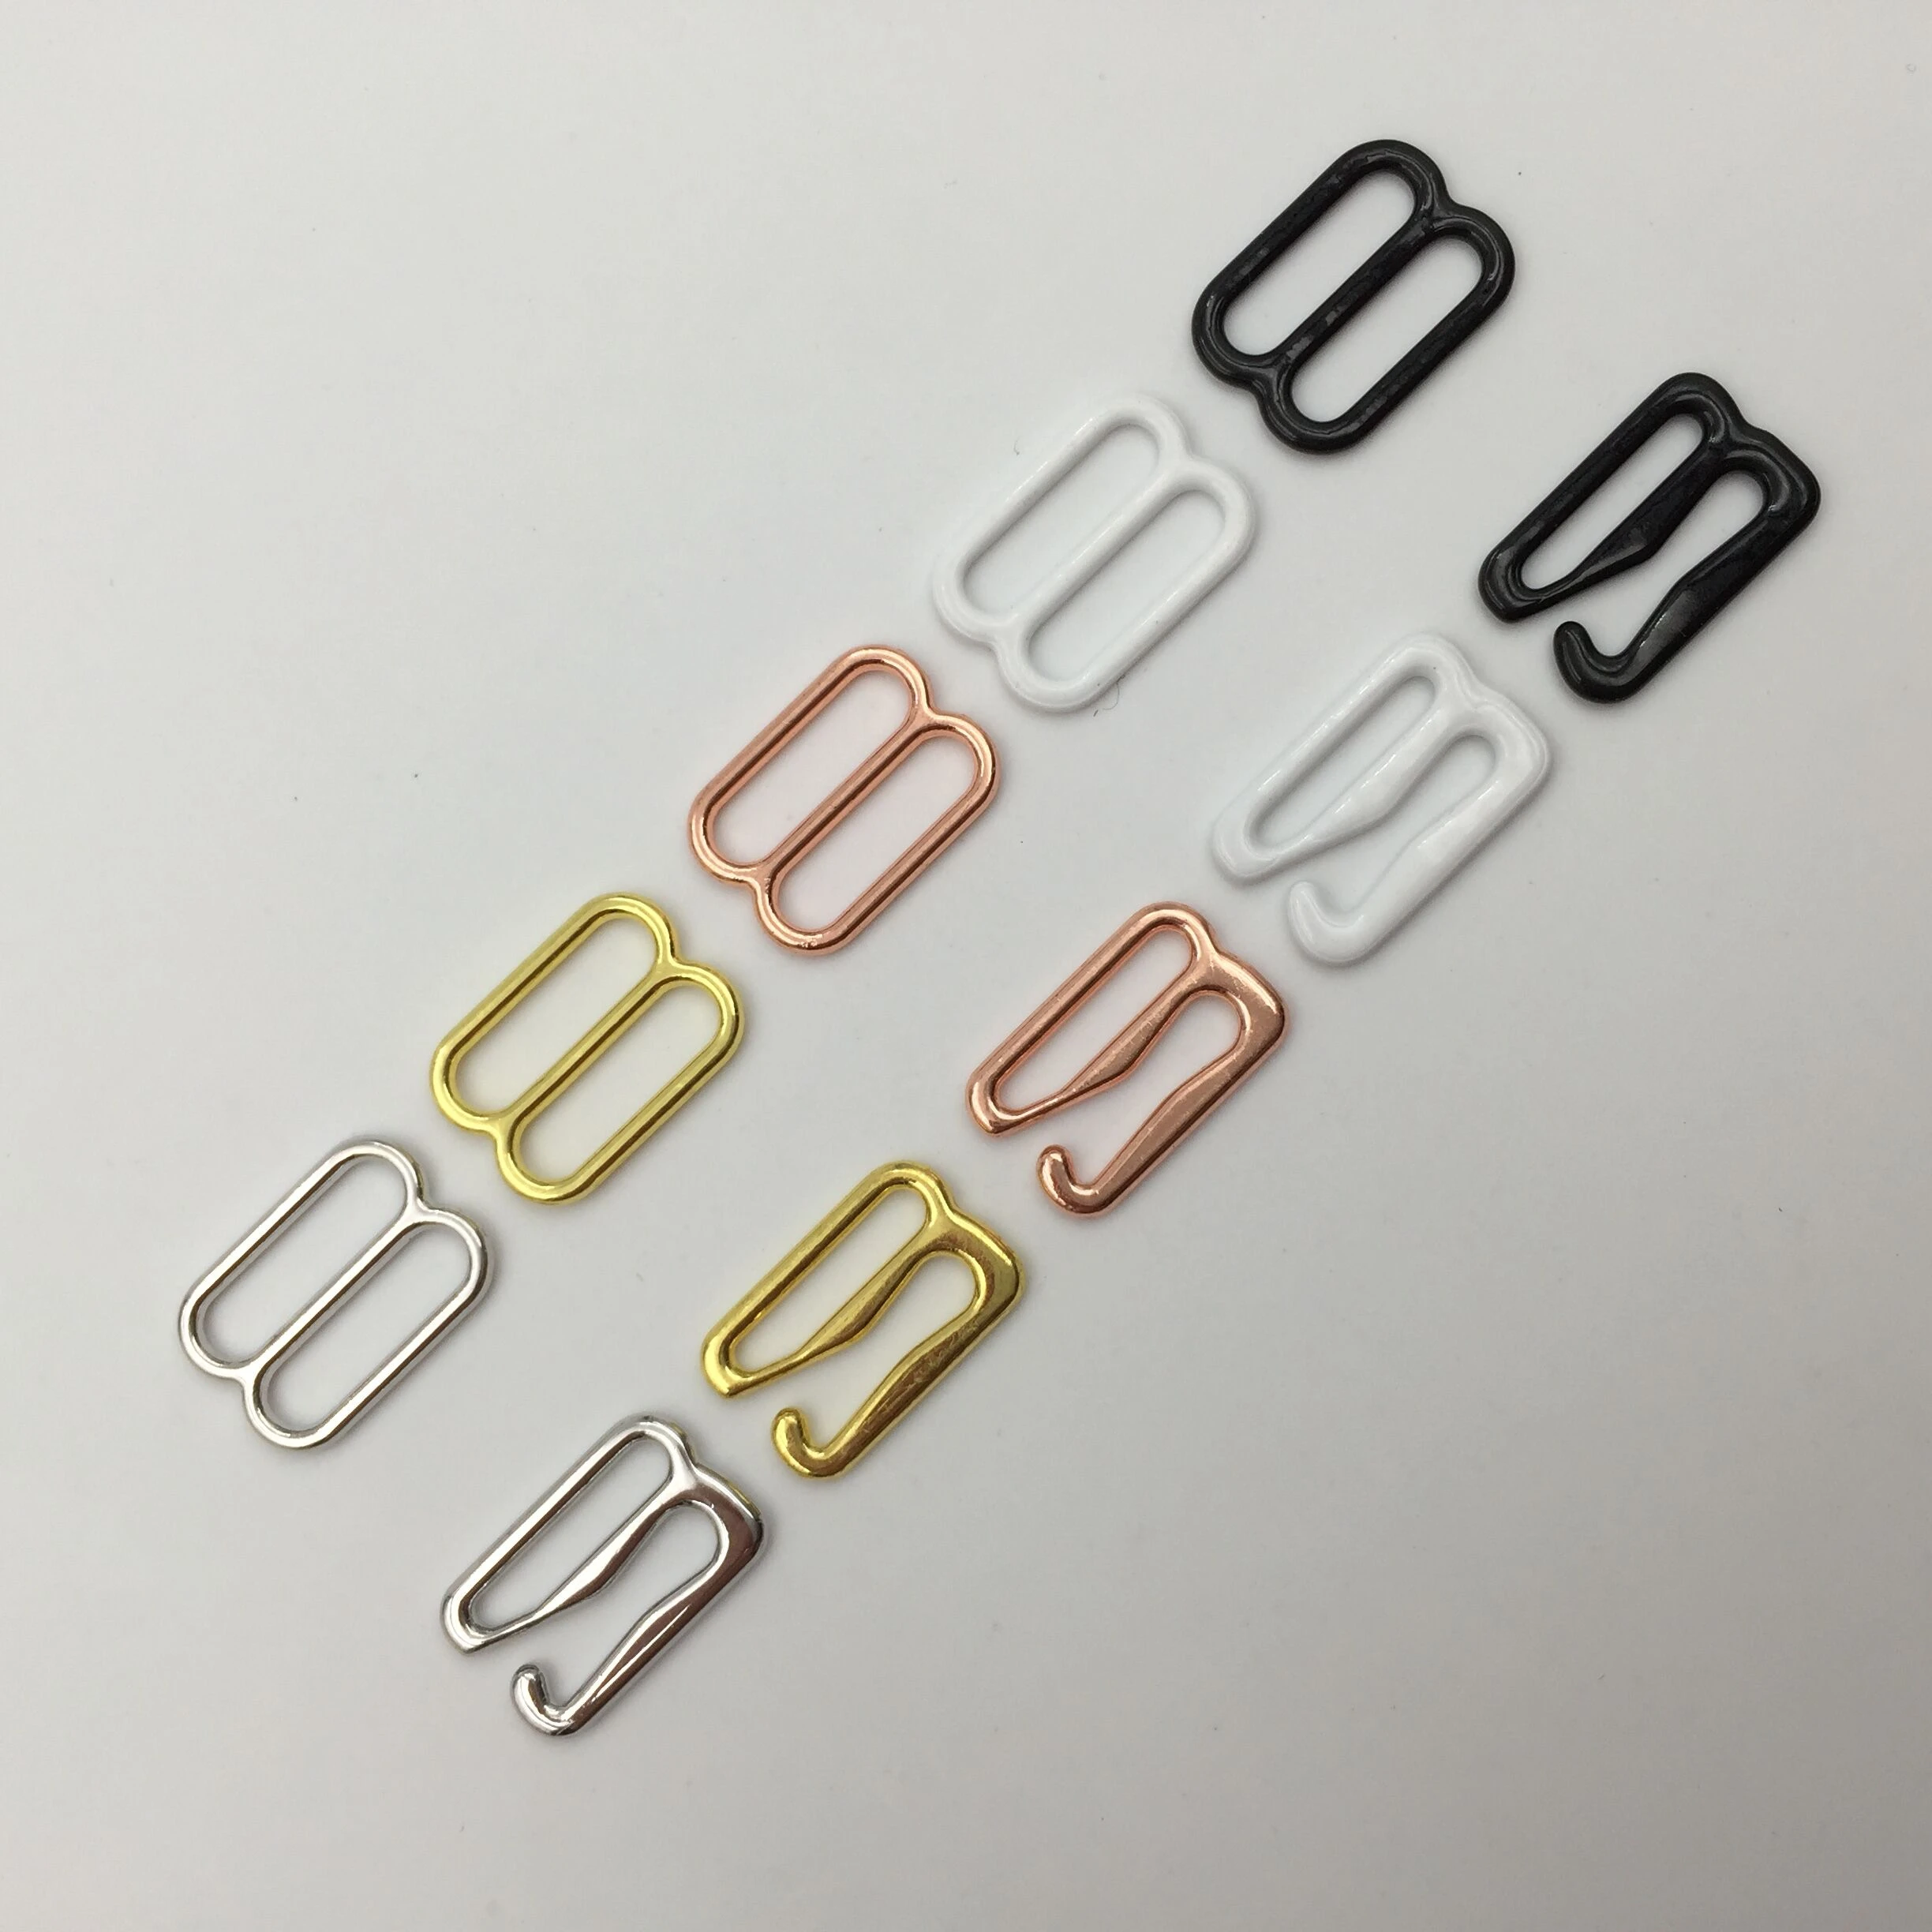 Wholesale 10 sets  Various sizes of bra hooks and sliders strap adjusters buckles 5 color